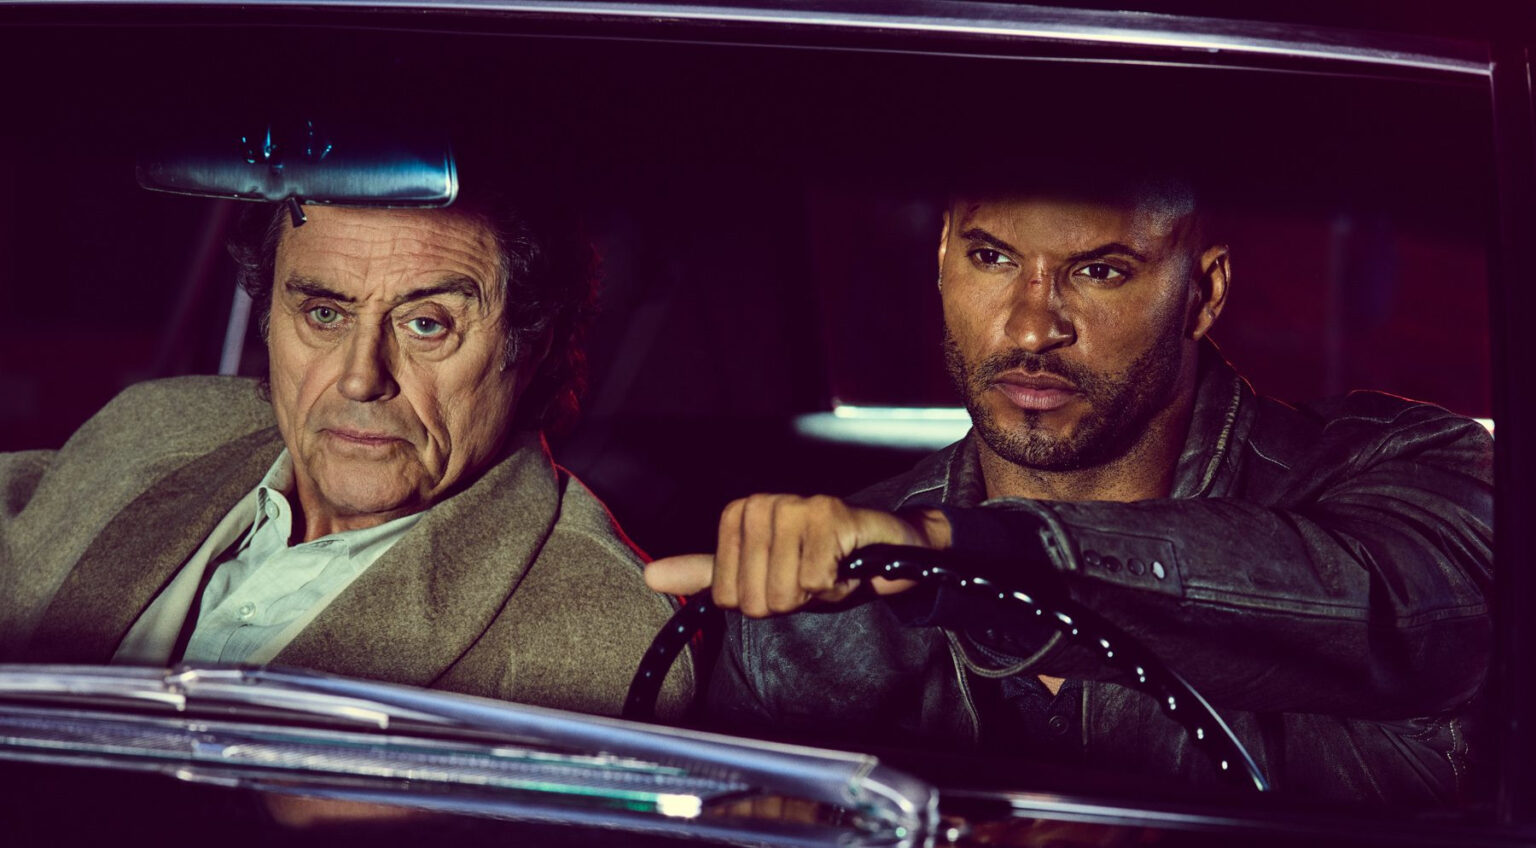 Did 'American Gods' really get canceled? See why Starz is calling it quits after season 3 and whether that's really the end for the series.